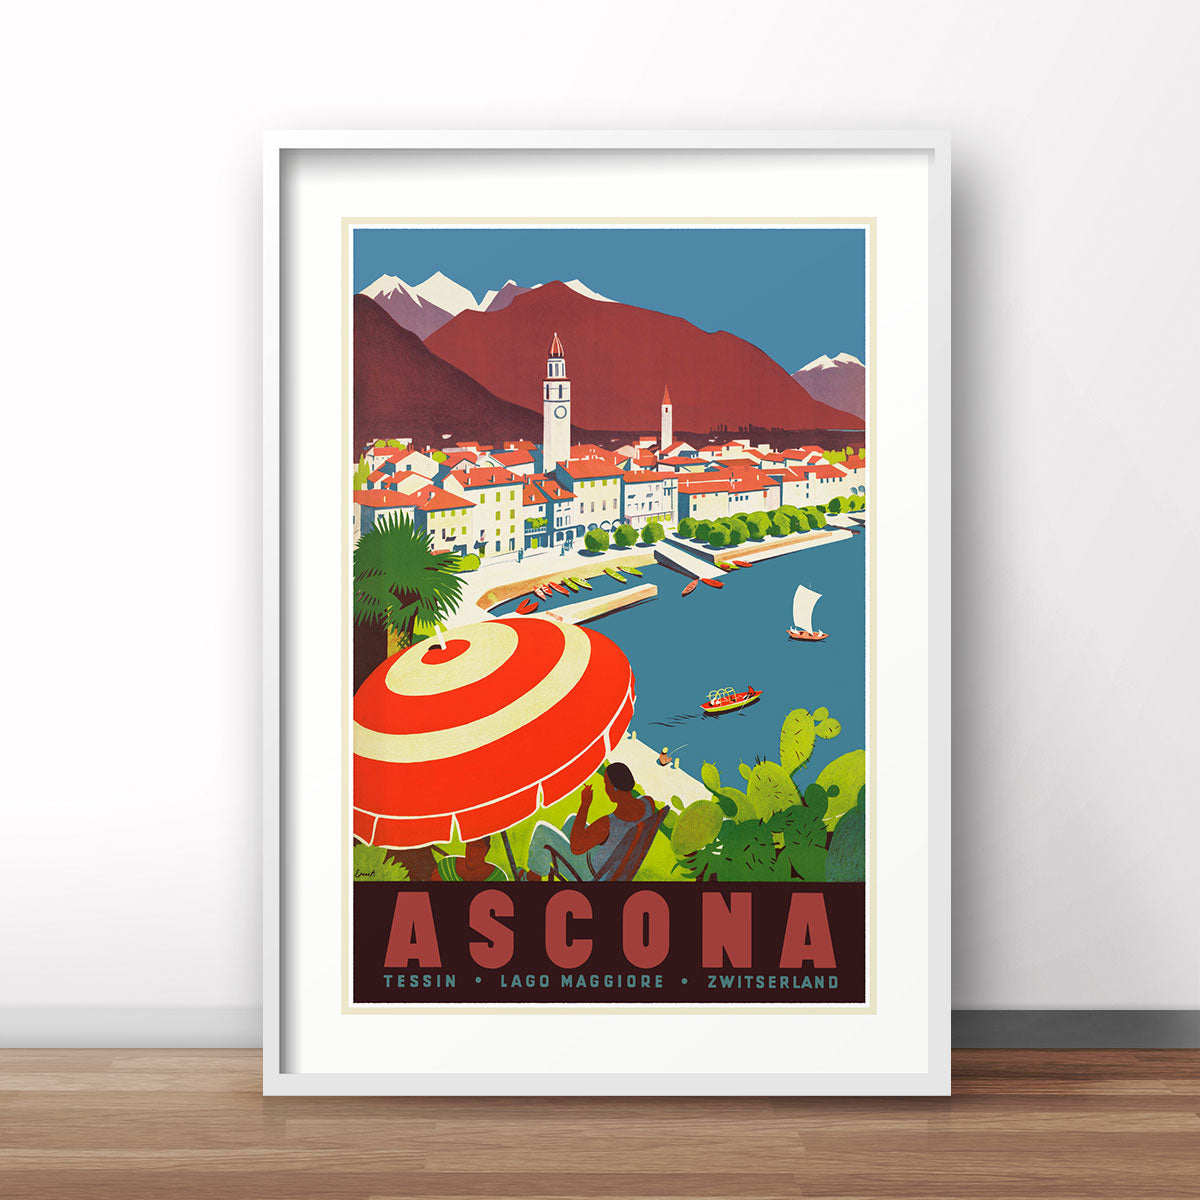 Ascona Switzerland vintage retro poster print from Places We Luv